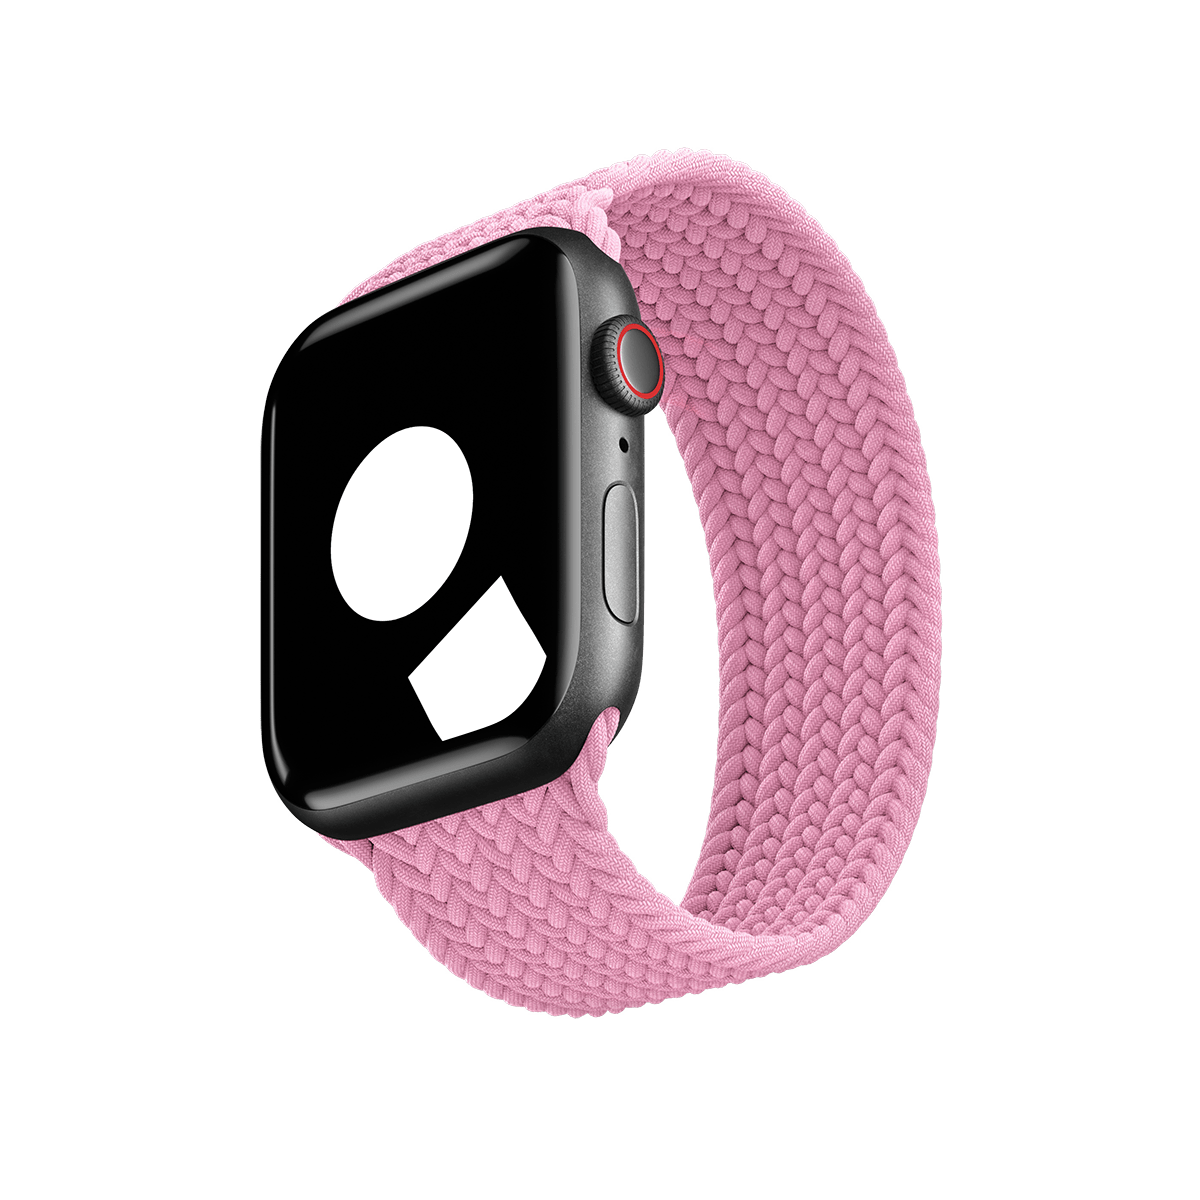 Flamingo Braided Solo Loop for Apple Watch